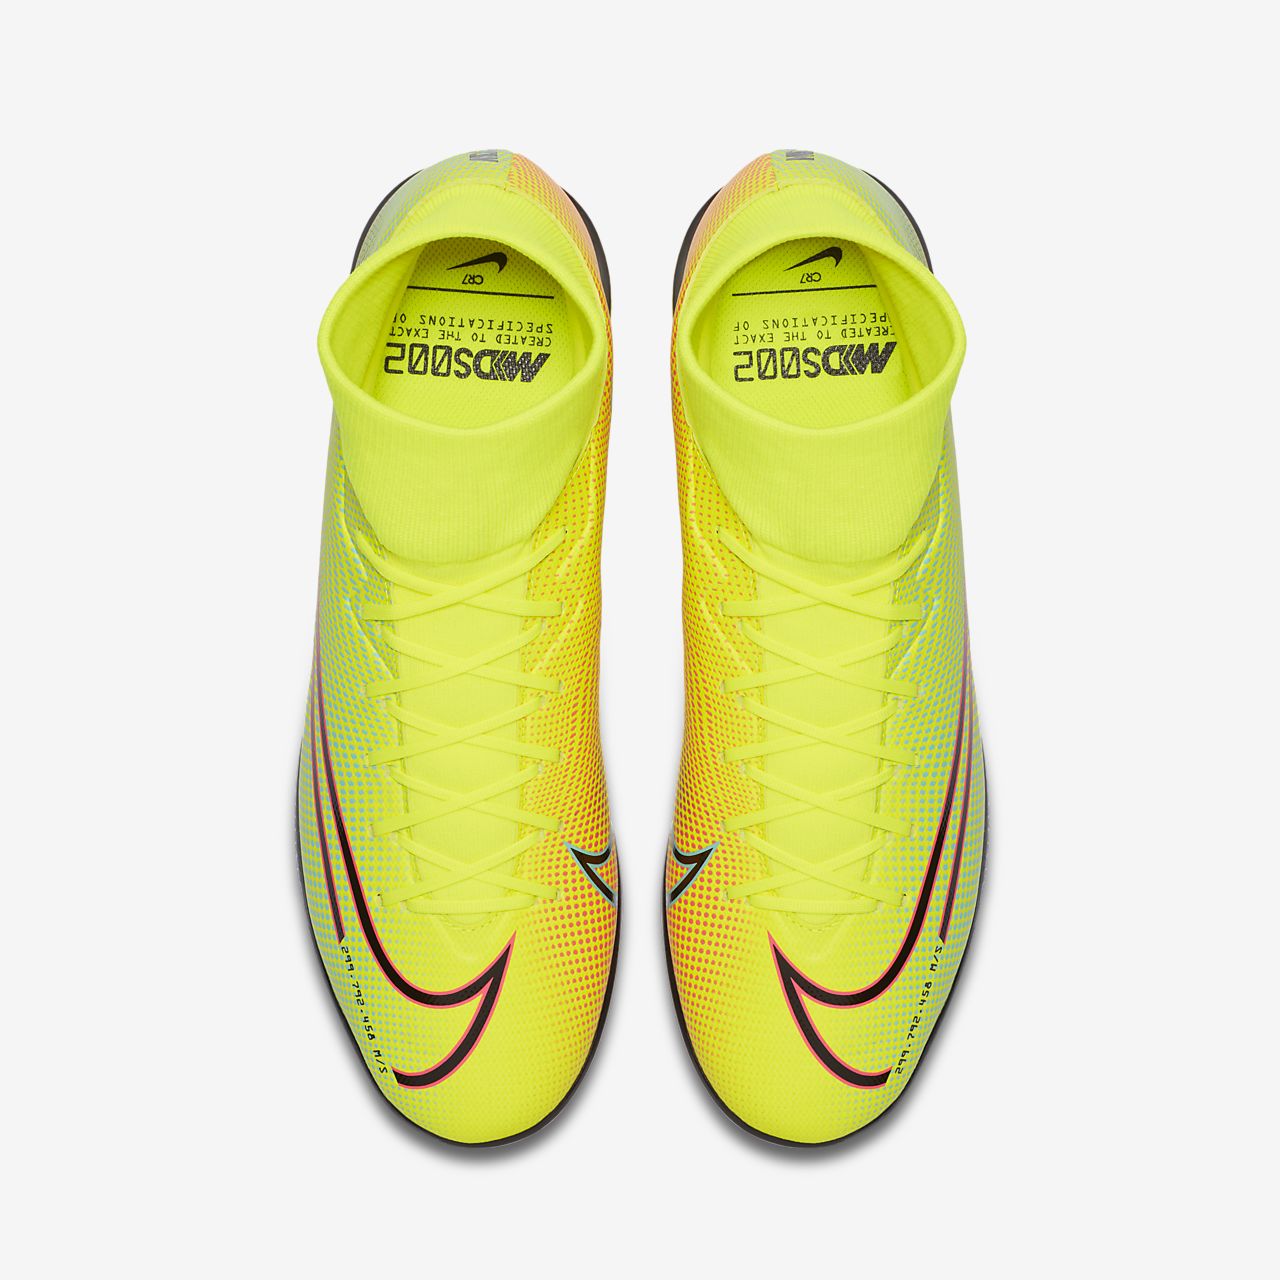 Nike Mercurial Superfly 7 Pro MDS AG PRO Artificial Grass.